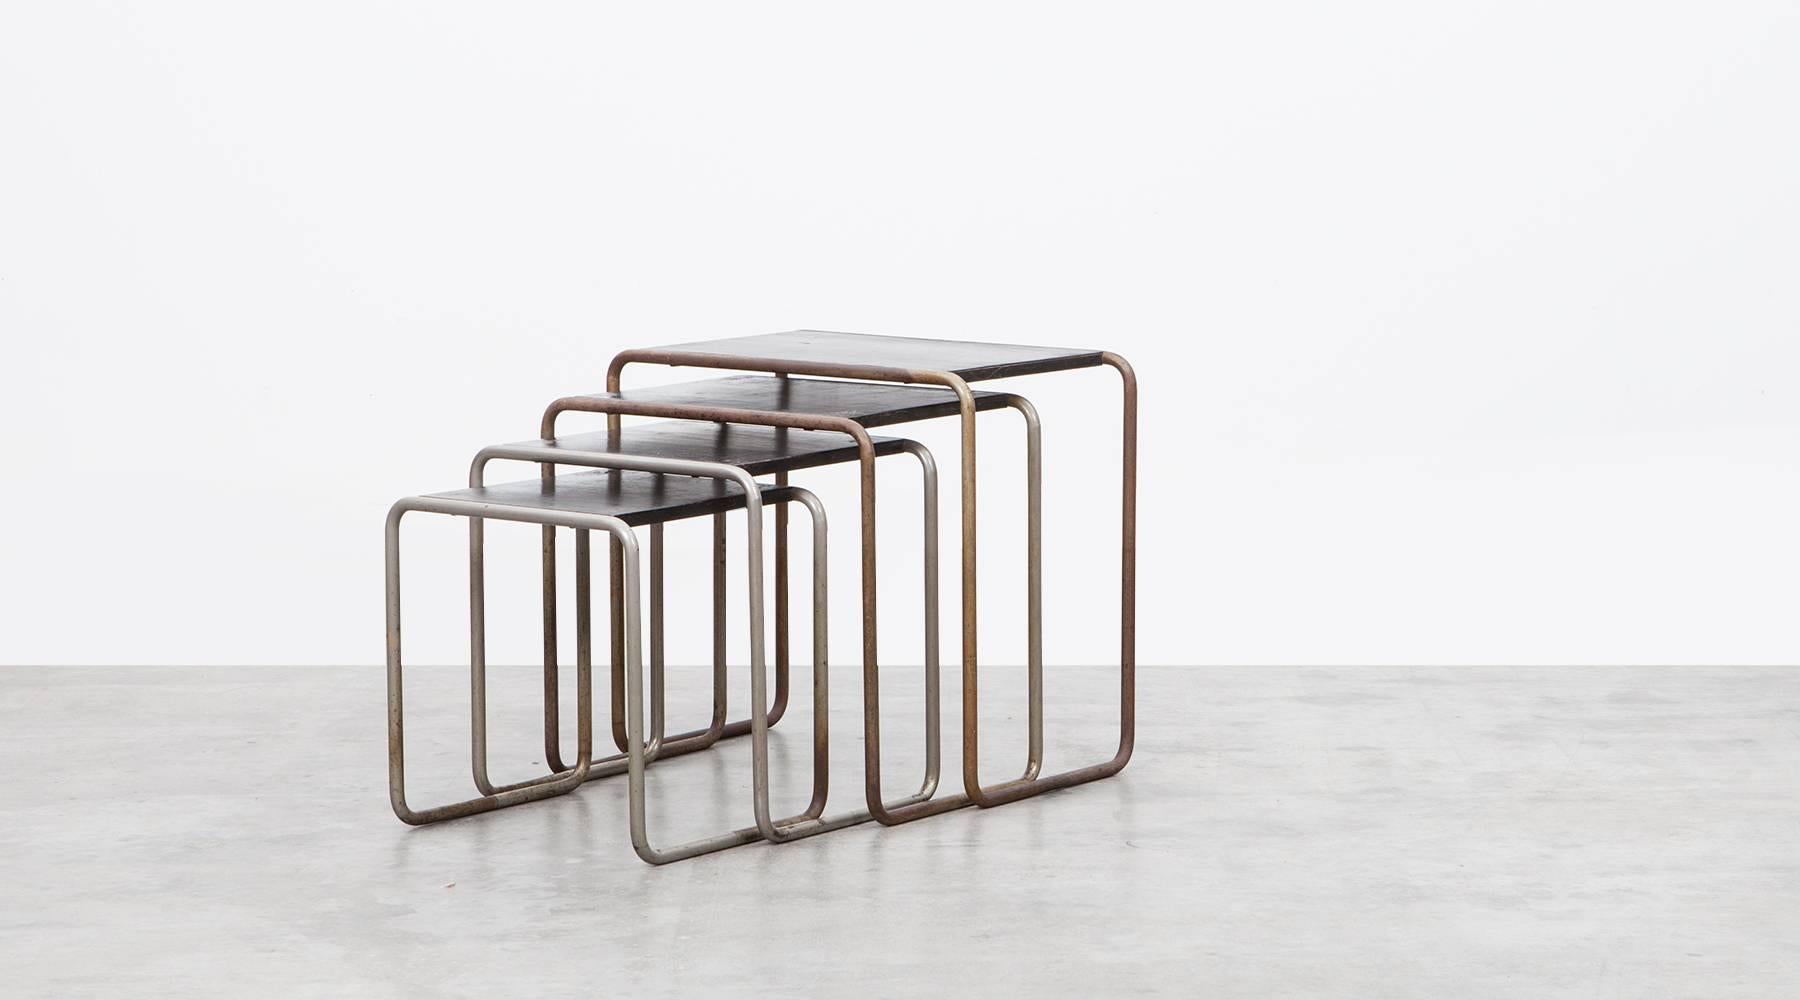 Bauhaus 1920s Black Stained Wood, Chromium-Plated Steel Nesting Tables by Marcel Breuer